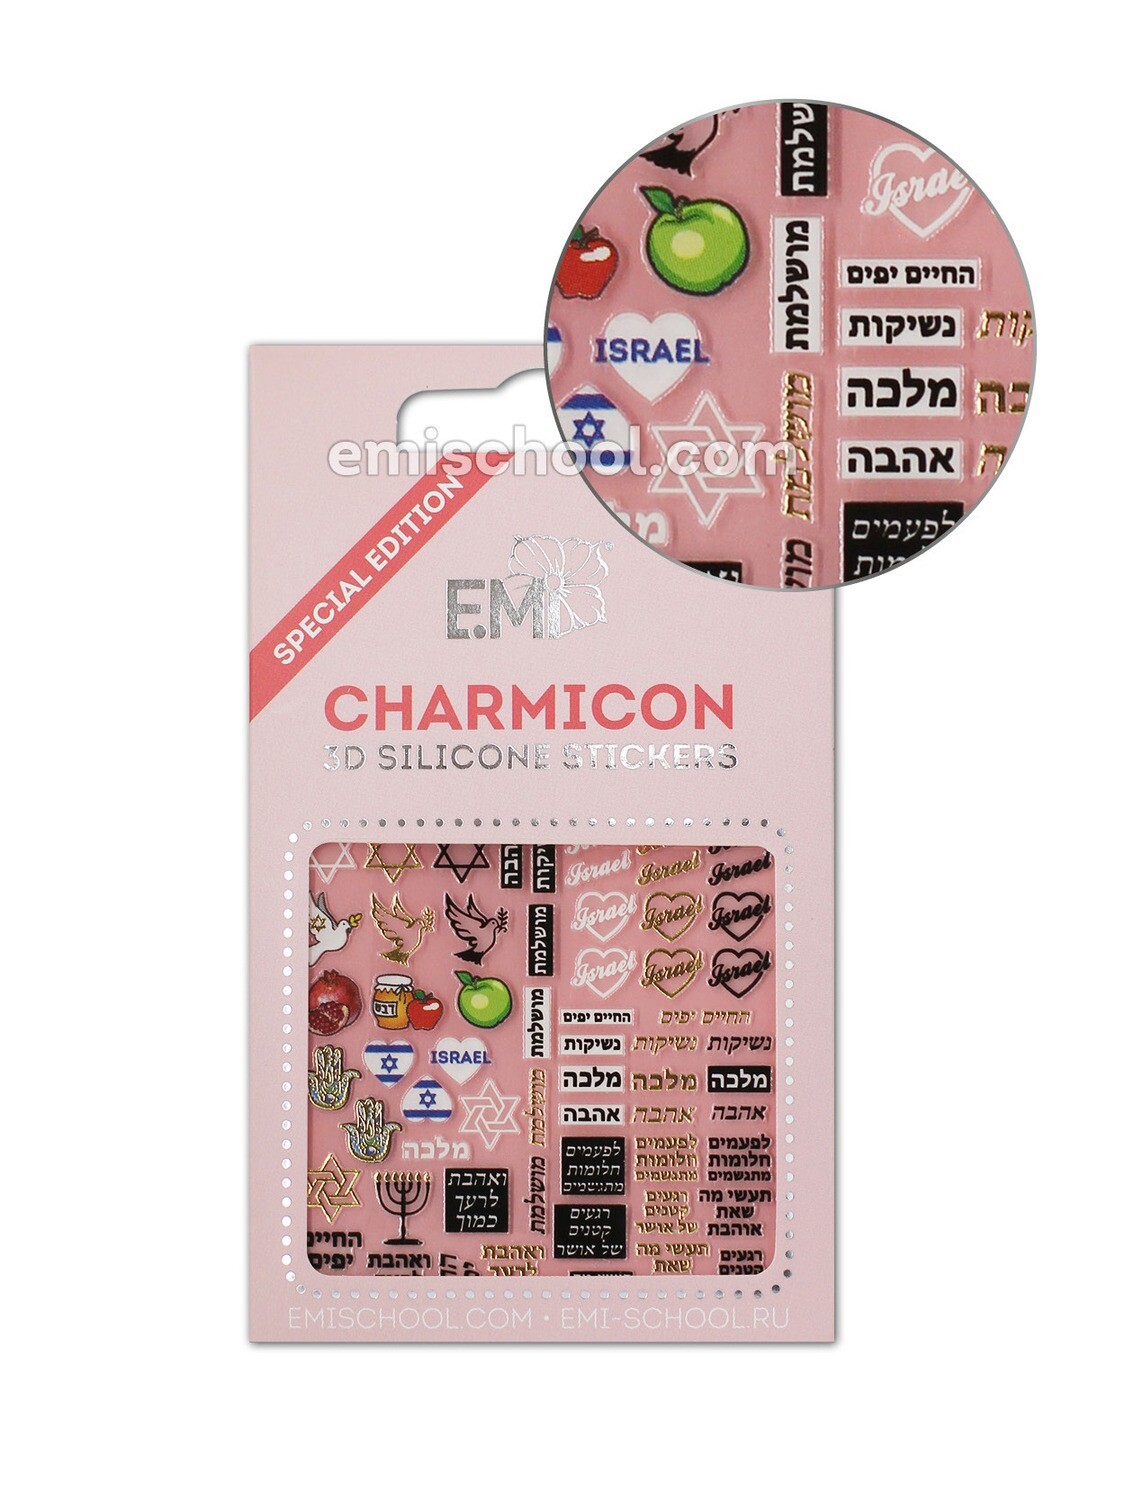 Charmicon 3D Silicone Stickers Israel